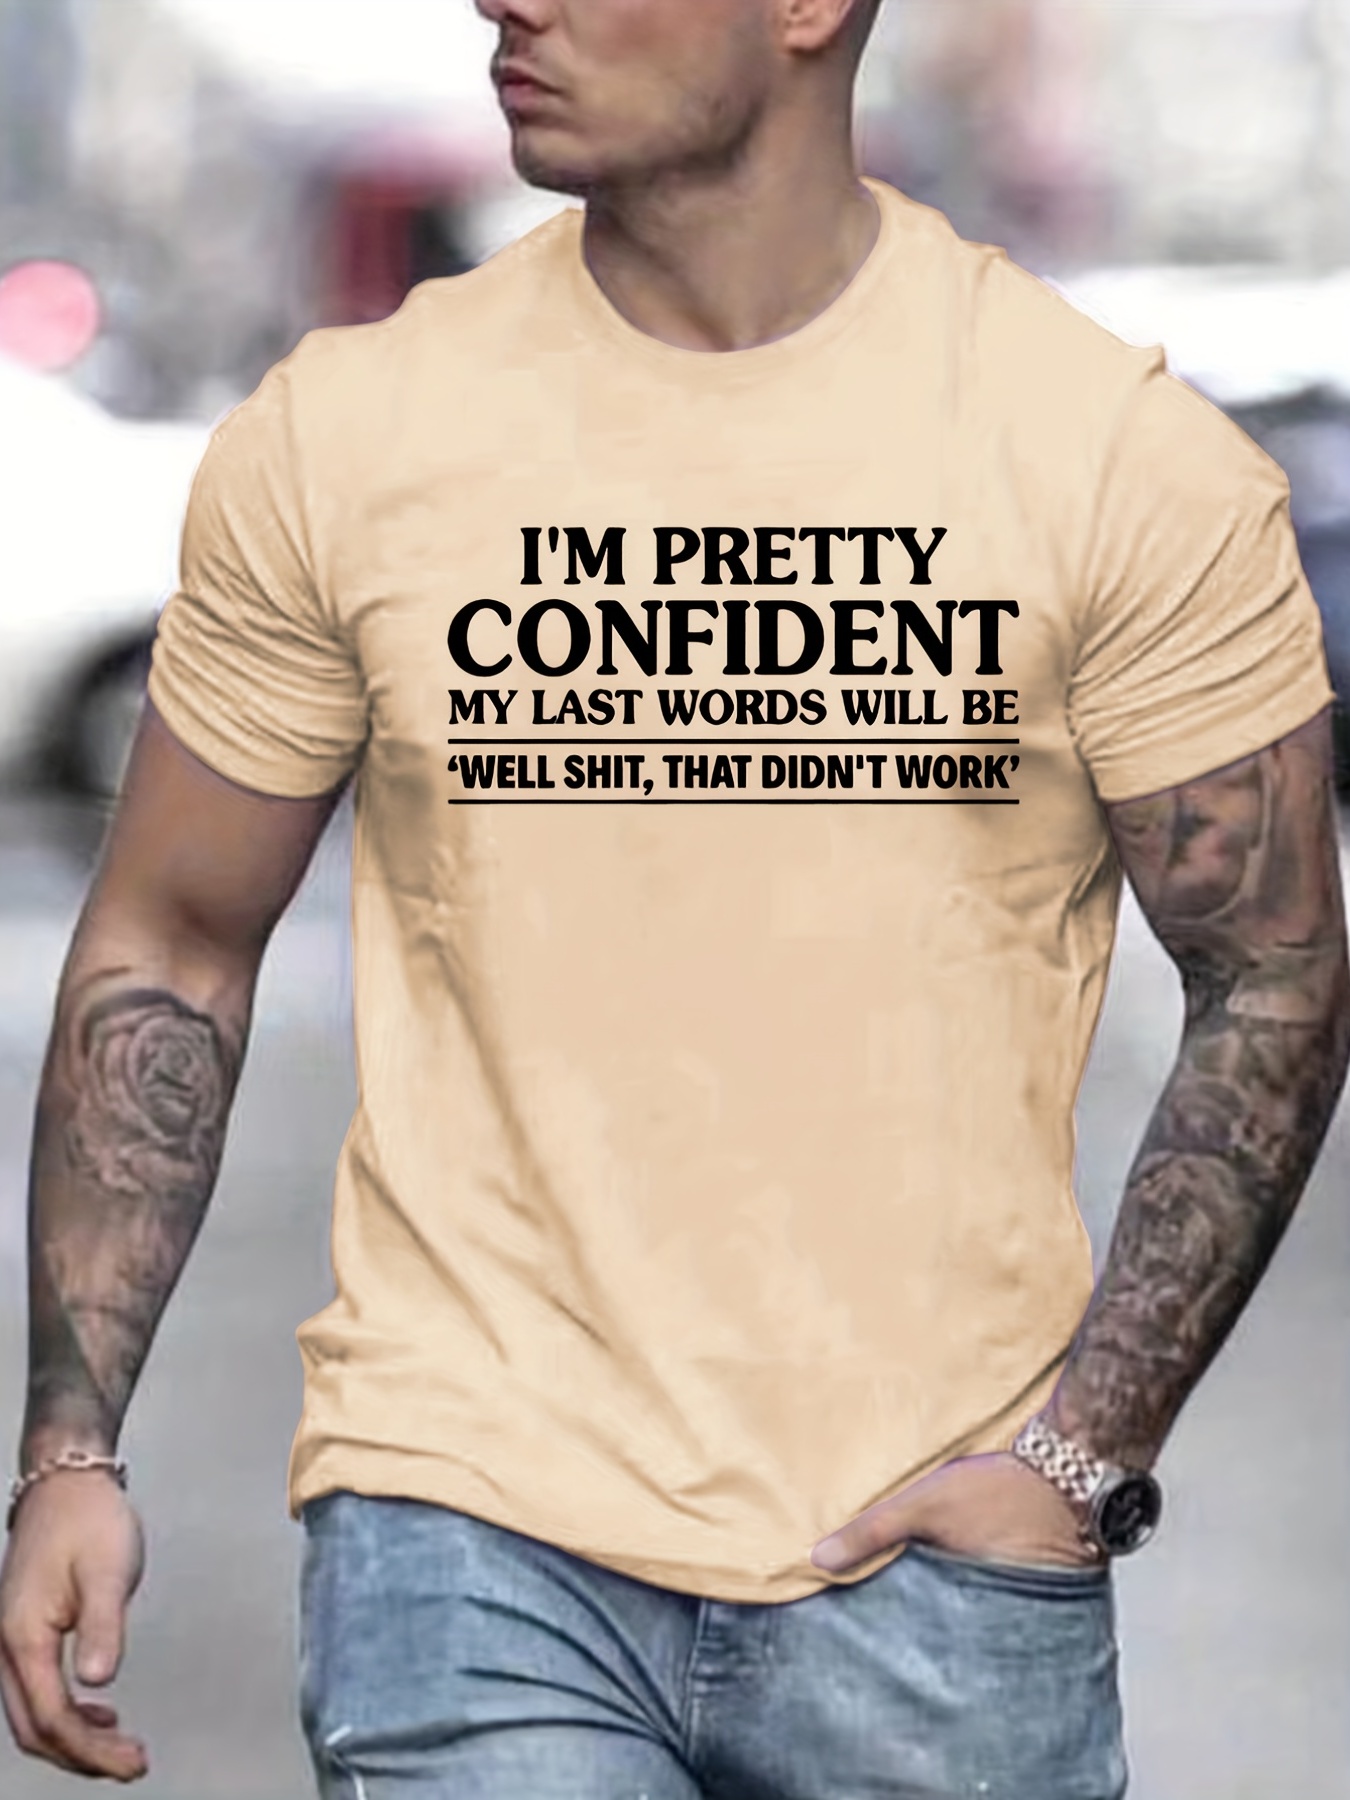 powerful slogan print mens graphic design crew neck t shirt casual comfy tees t shirts for summer mens clothing tops details 17